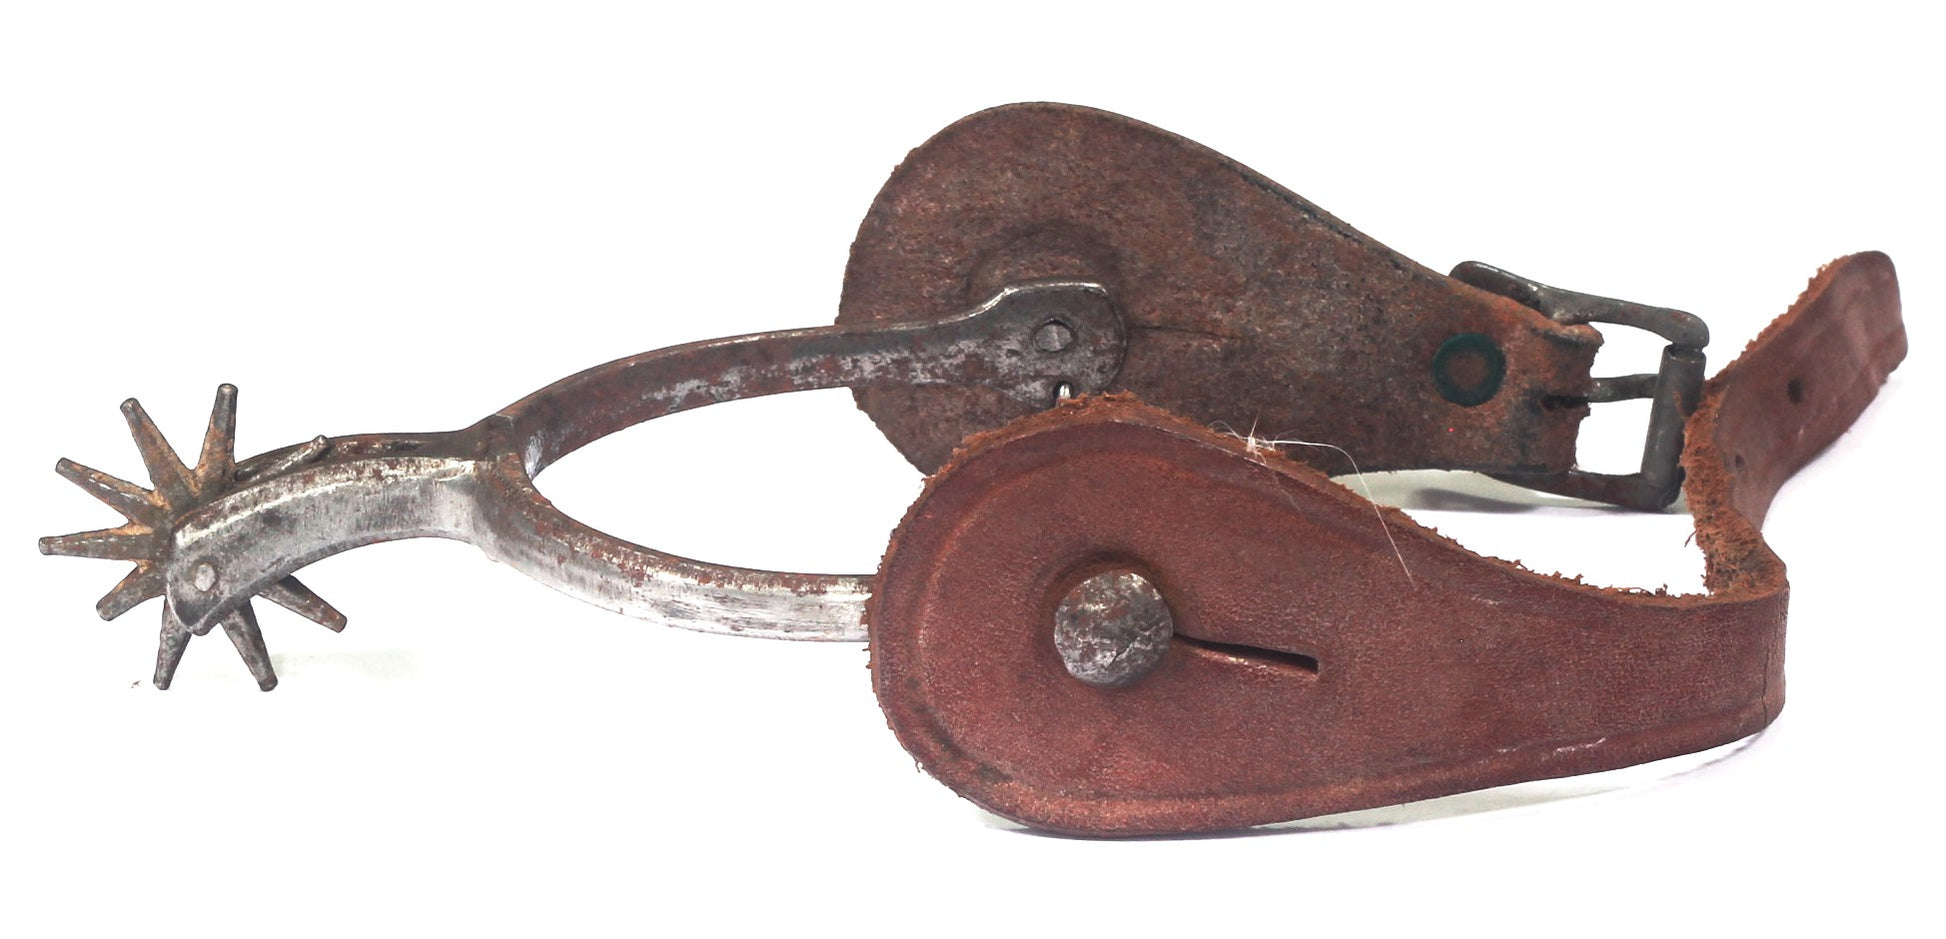 Pair of Small Cowboy or Western Spurs